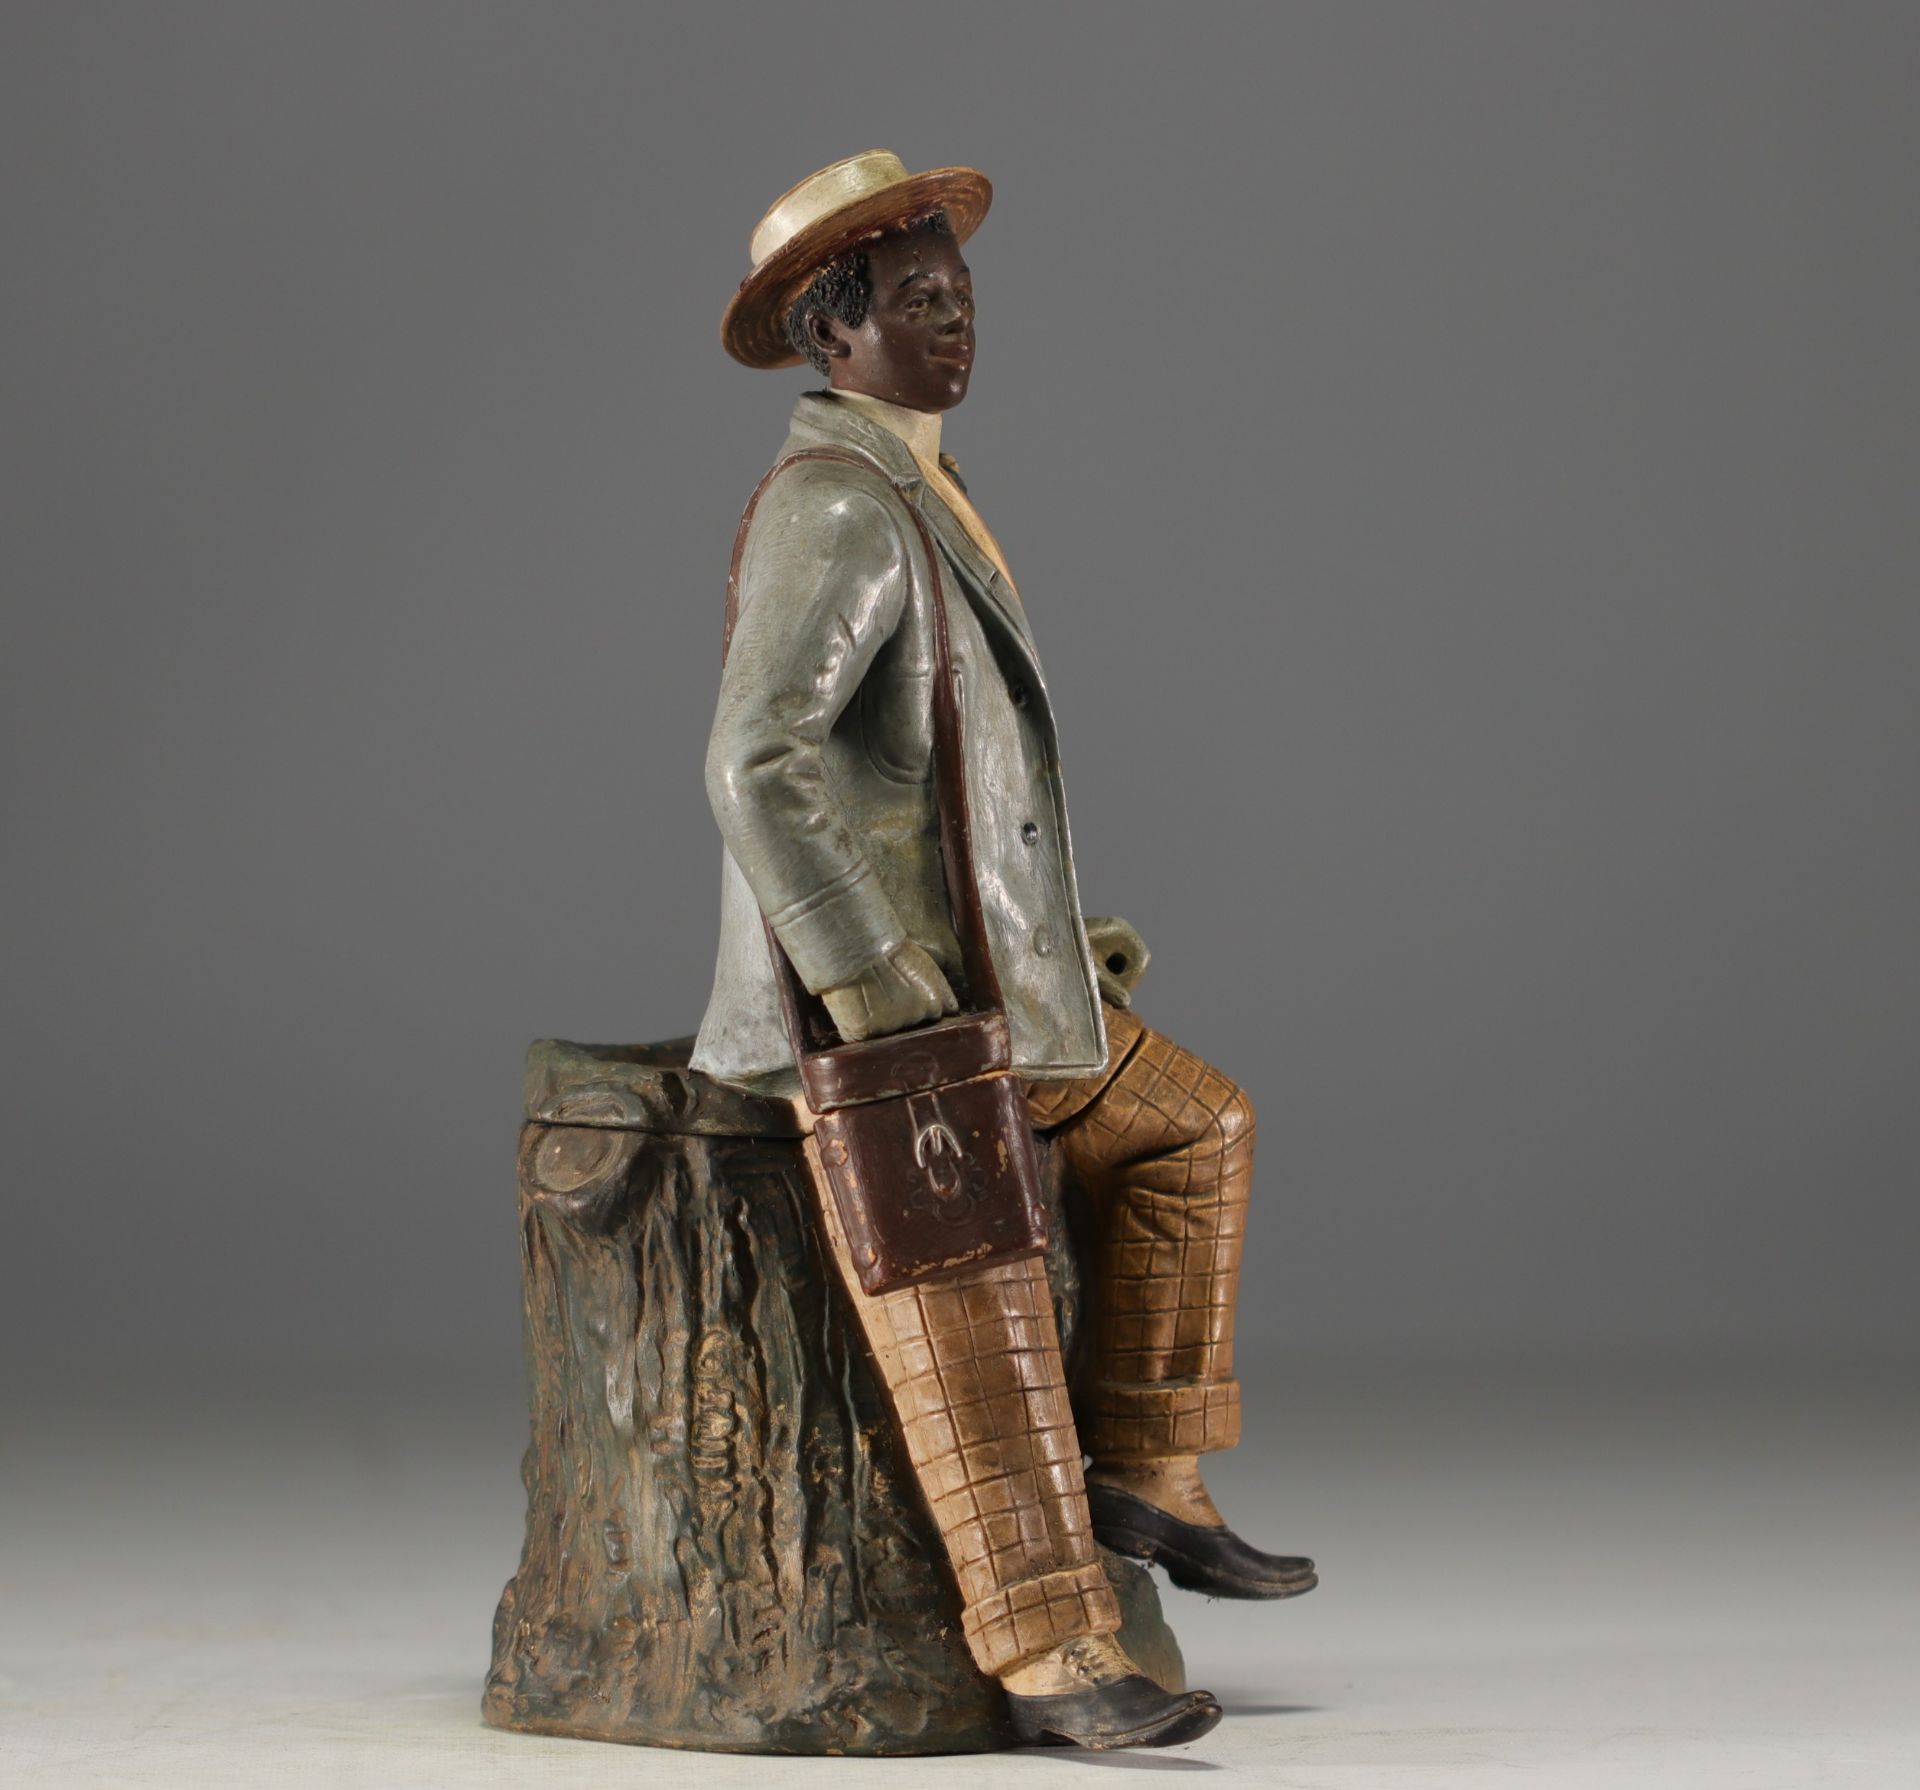 Bernhard BLOCH (1836-1909) "Young African dandy" Polychrome terracotta tobacco pot. - Image 3 of 4